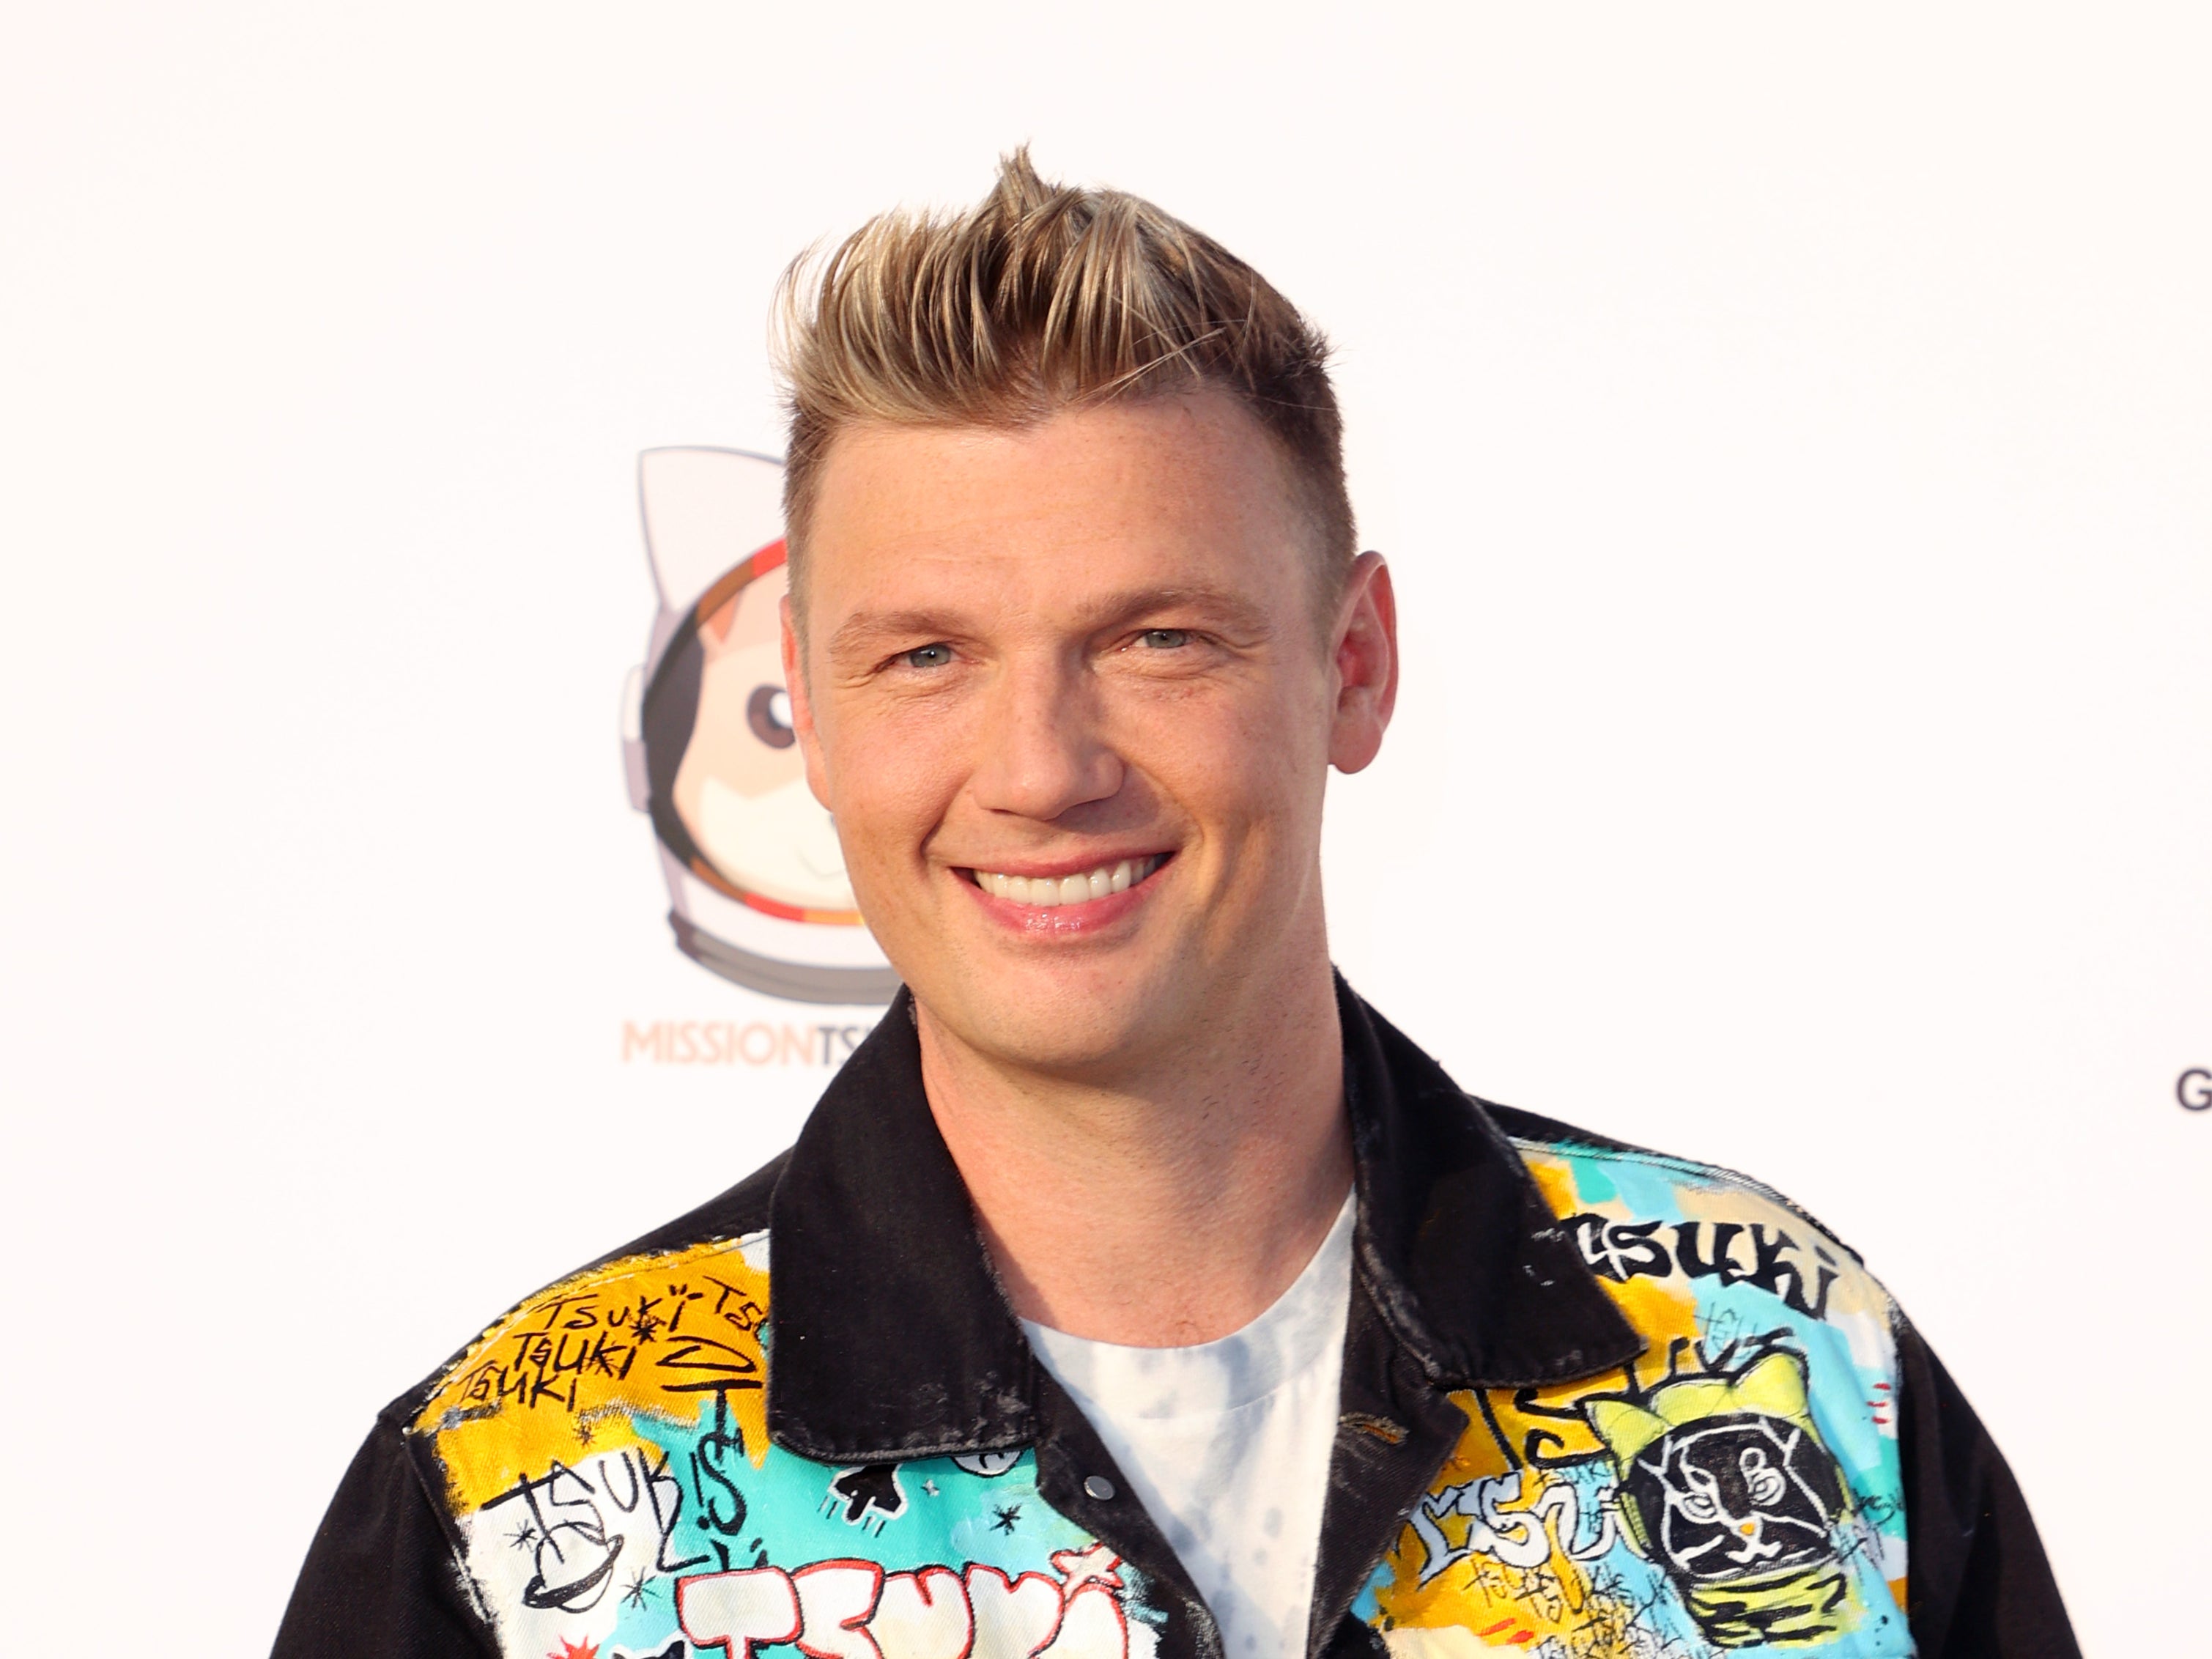 Nick Carter of Backstreet Boys attends "Bingo Under The Stars" in celebration of Pride, hosted by members of NSYNC and Backstreet Boys at The Grove on June 18, 2021 in Los Angeles, California. (Photo by Kevin Winter/Getty Images)